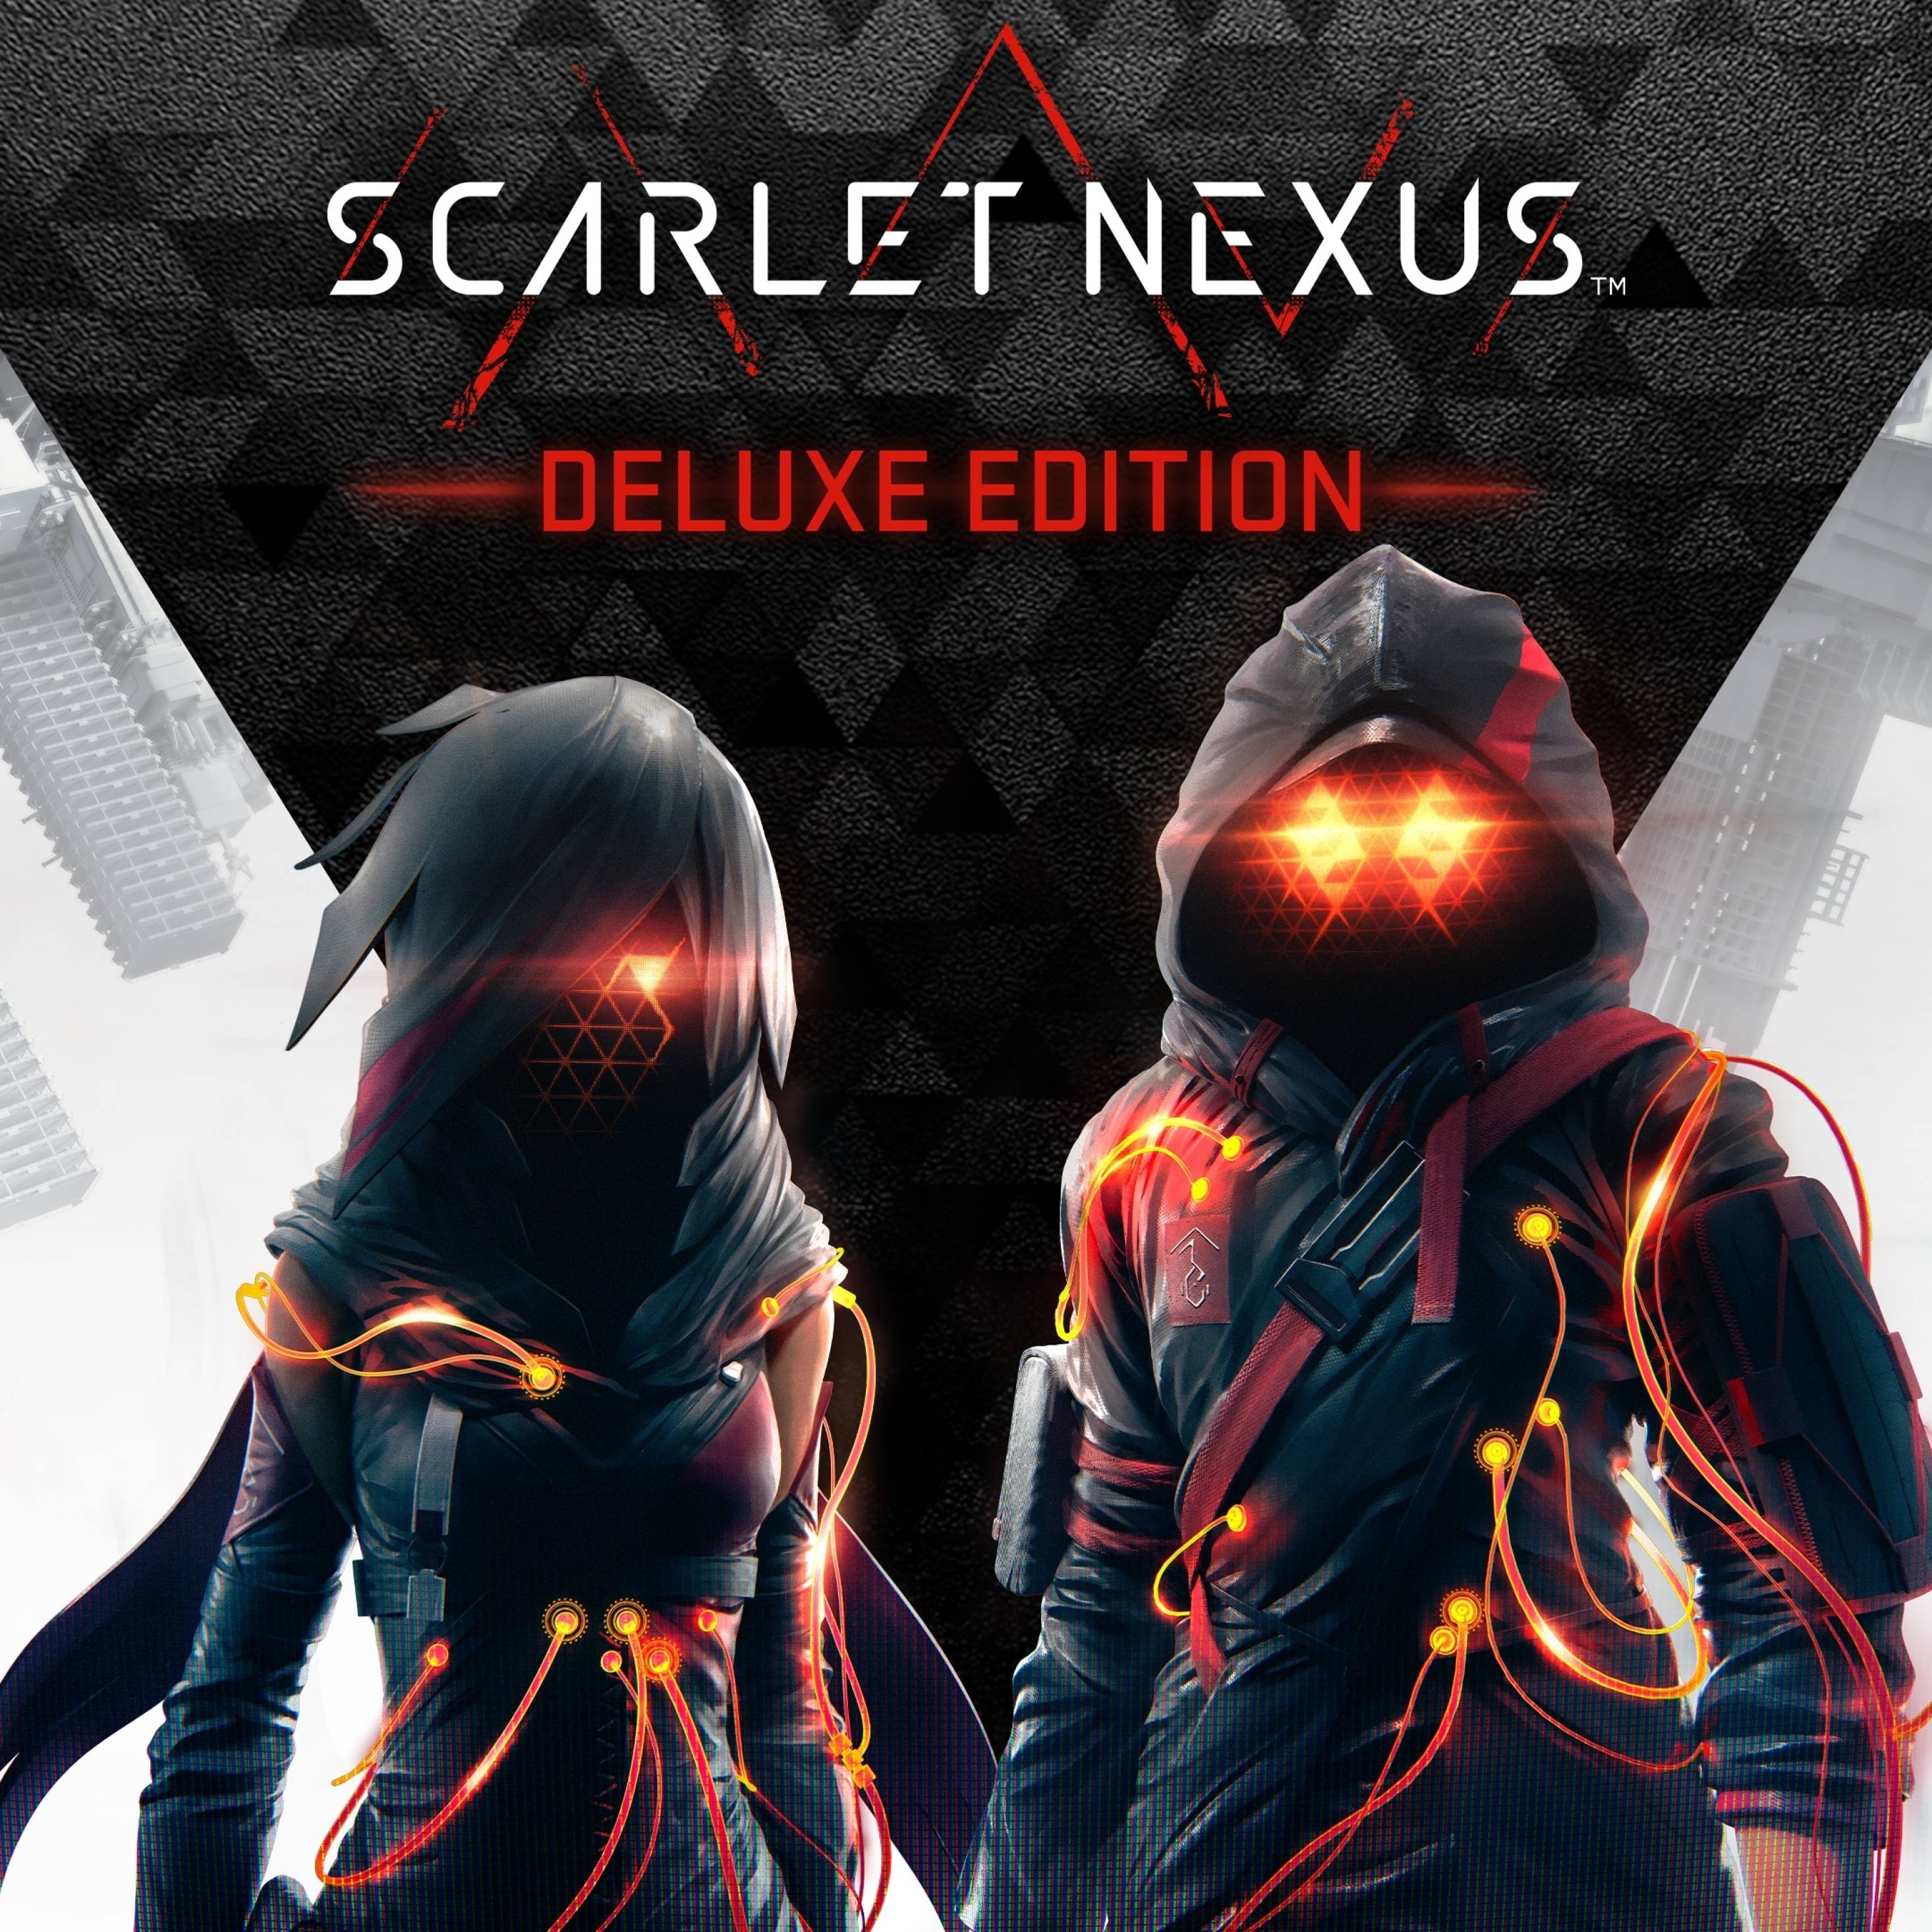 When is the Scarlet Nexus anime release date? - GameRevolution